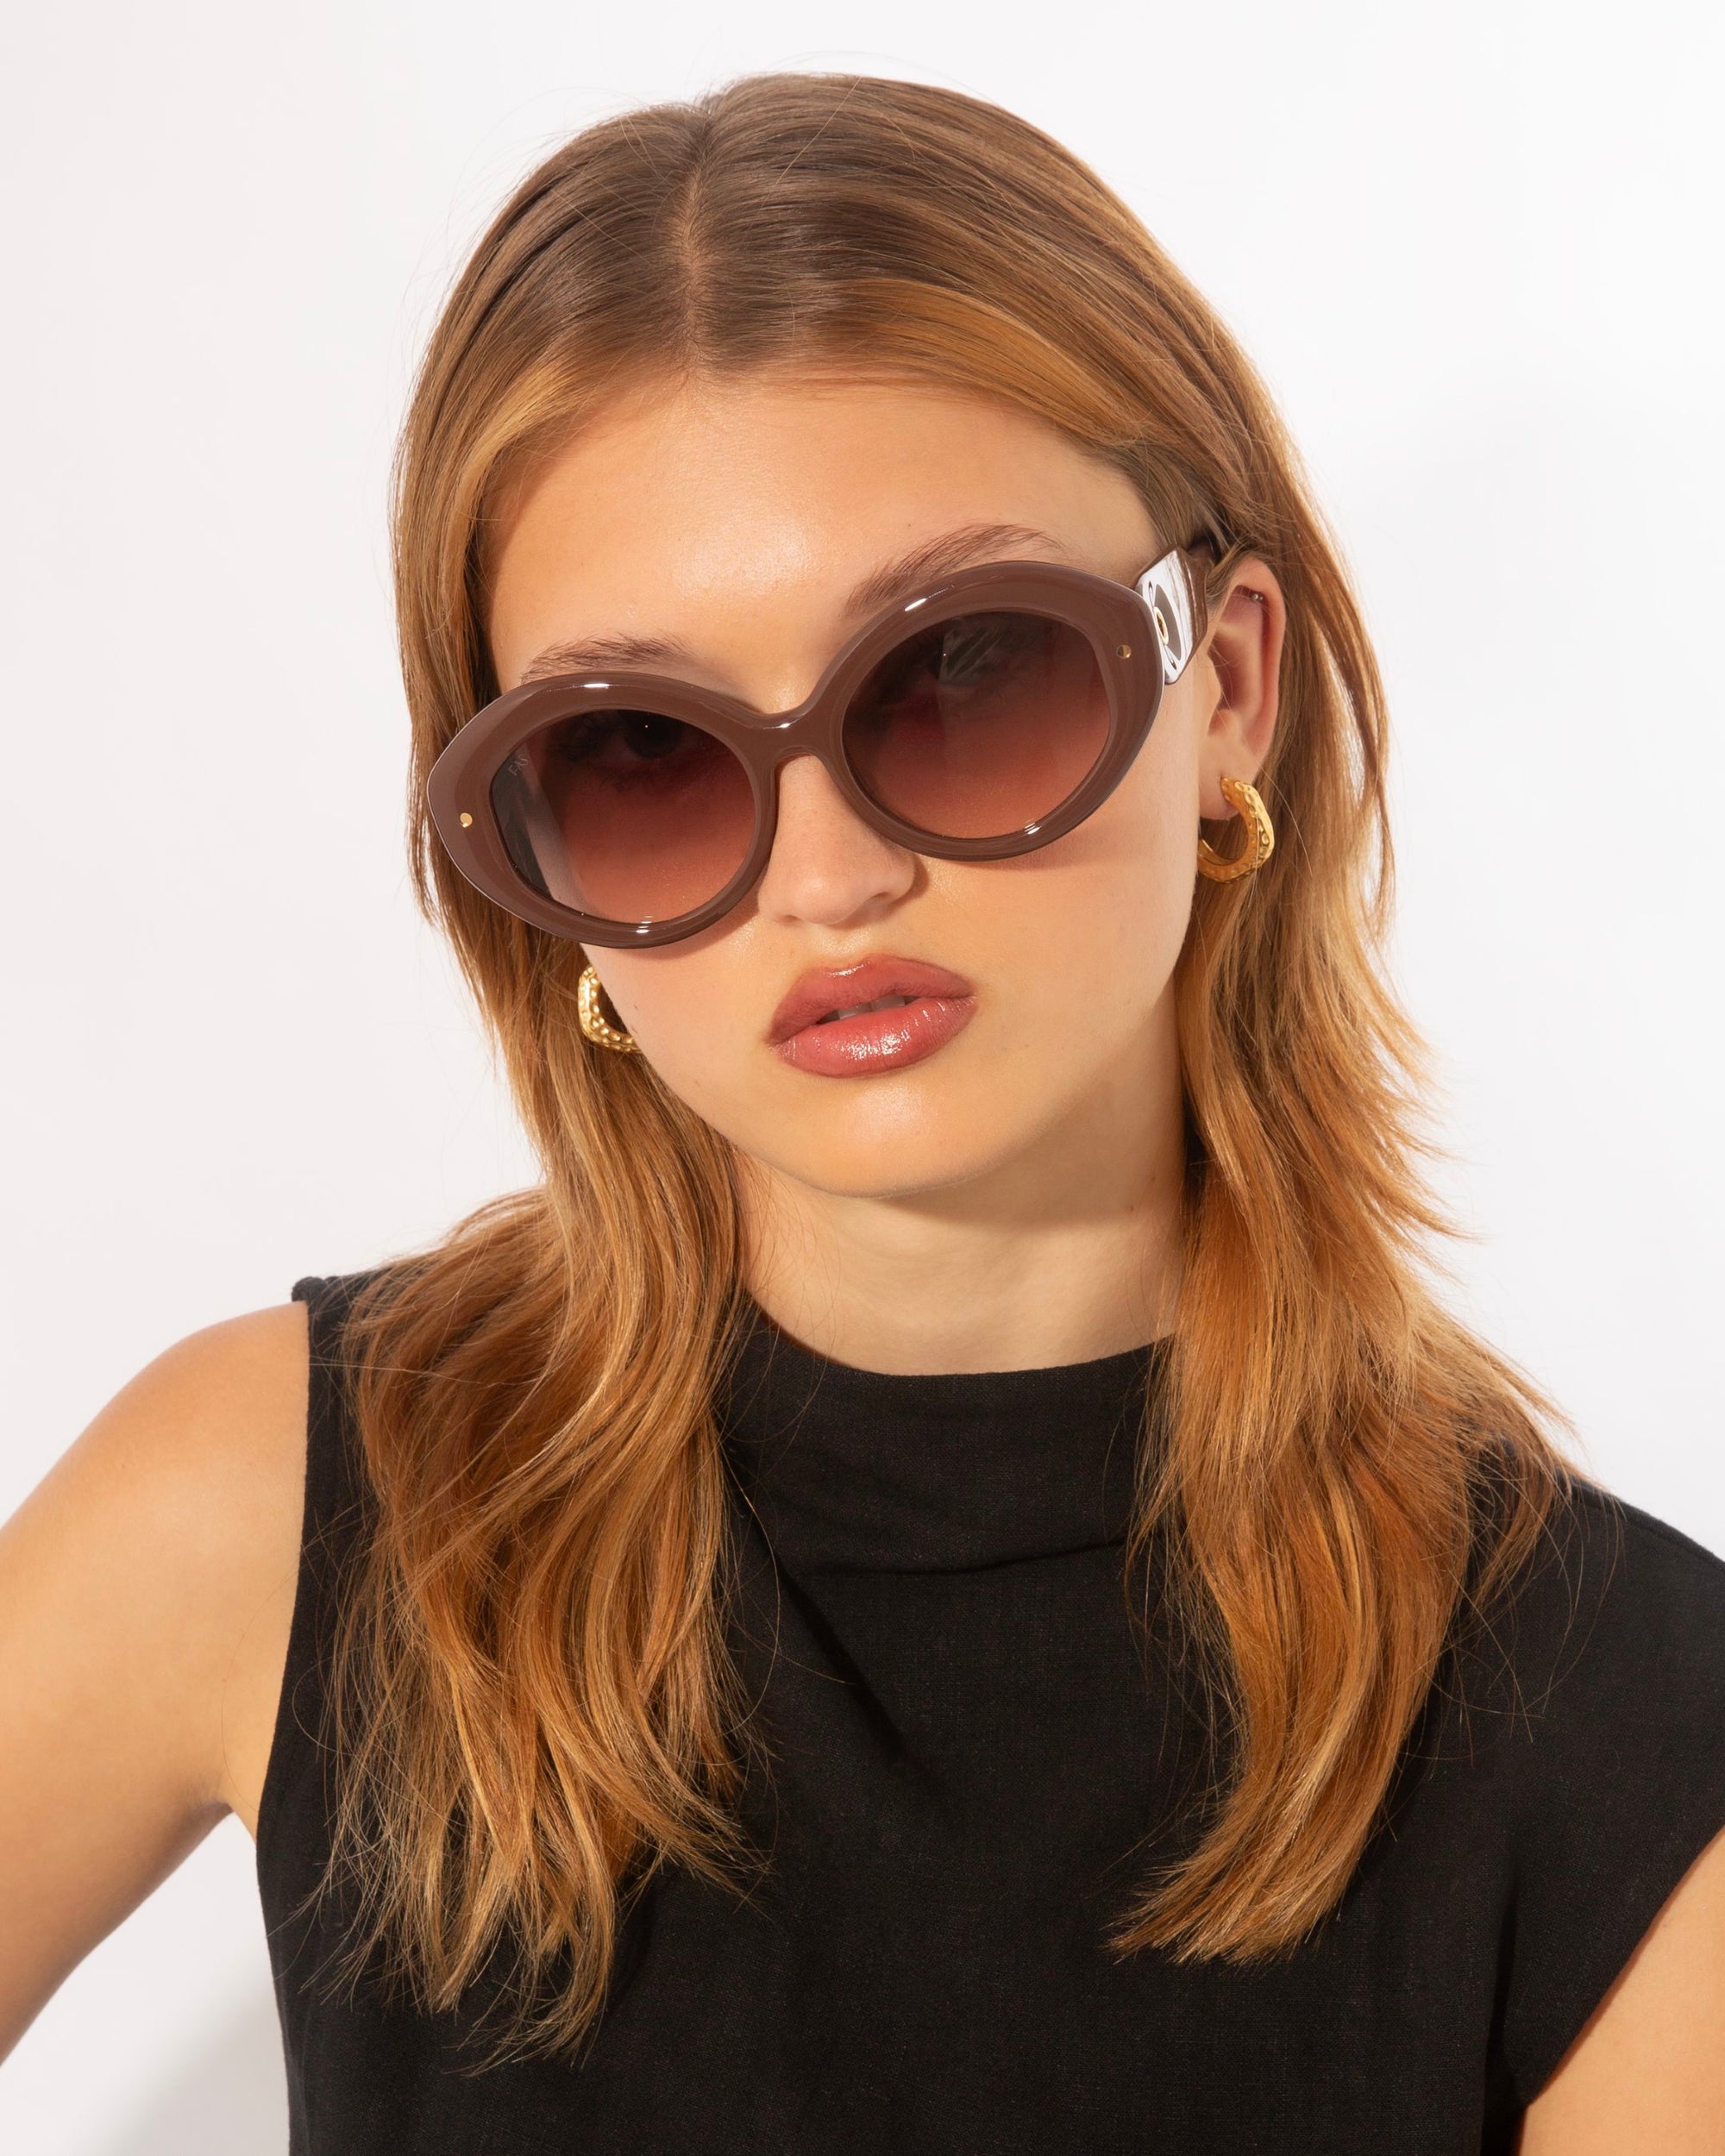 A person with light brown, shoulder-length hair is wearing large, Helios sunglasses by For Art&#39;s Sake® with a brown tint. They have gold hoop earrings and are dressed in a sleeveless black top. The luxury eyewear adds a touch of sophistication against the plain white background.